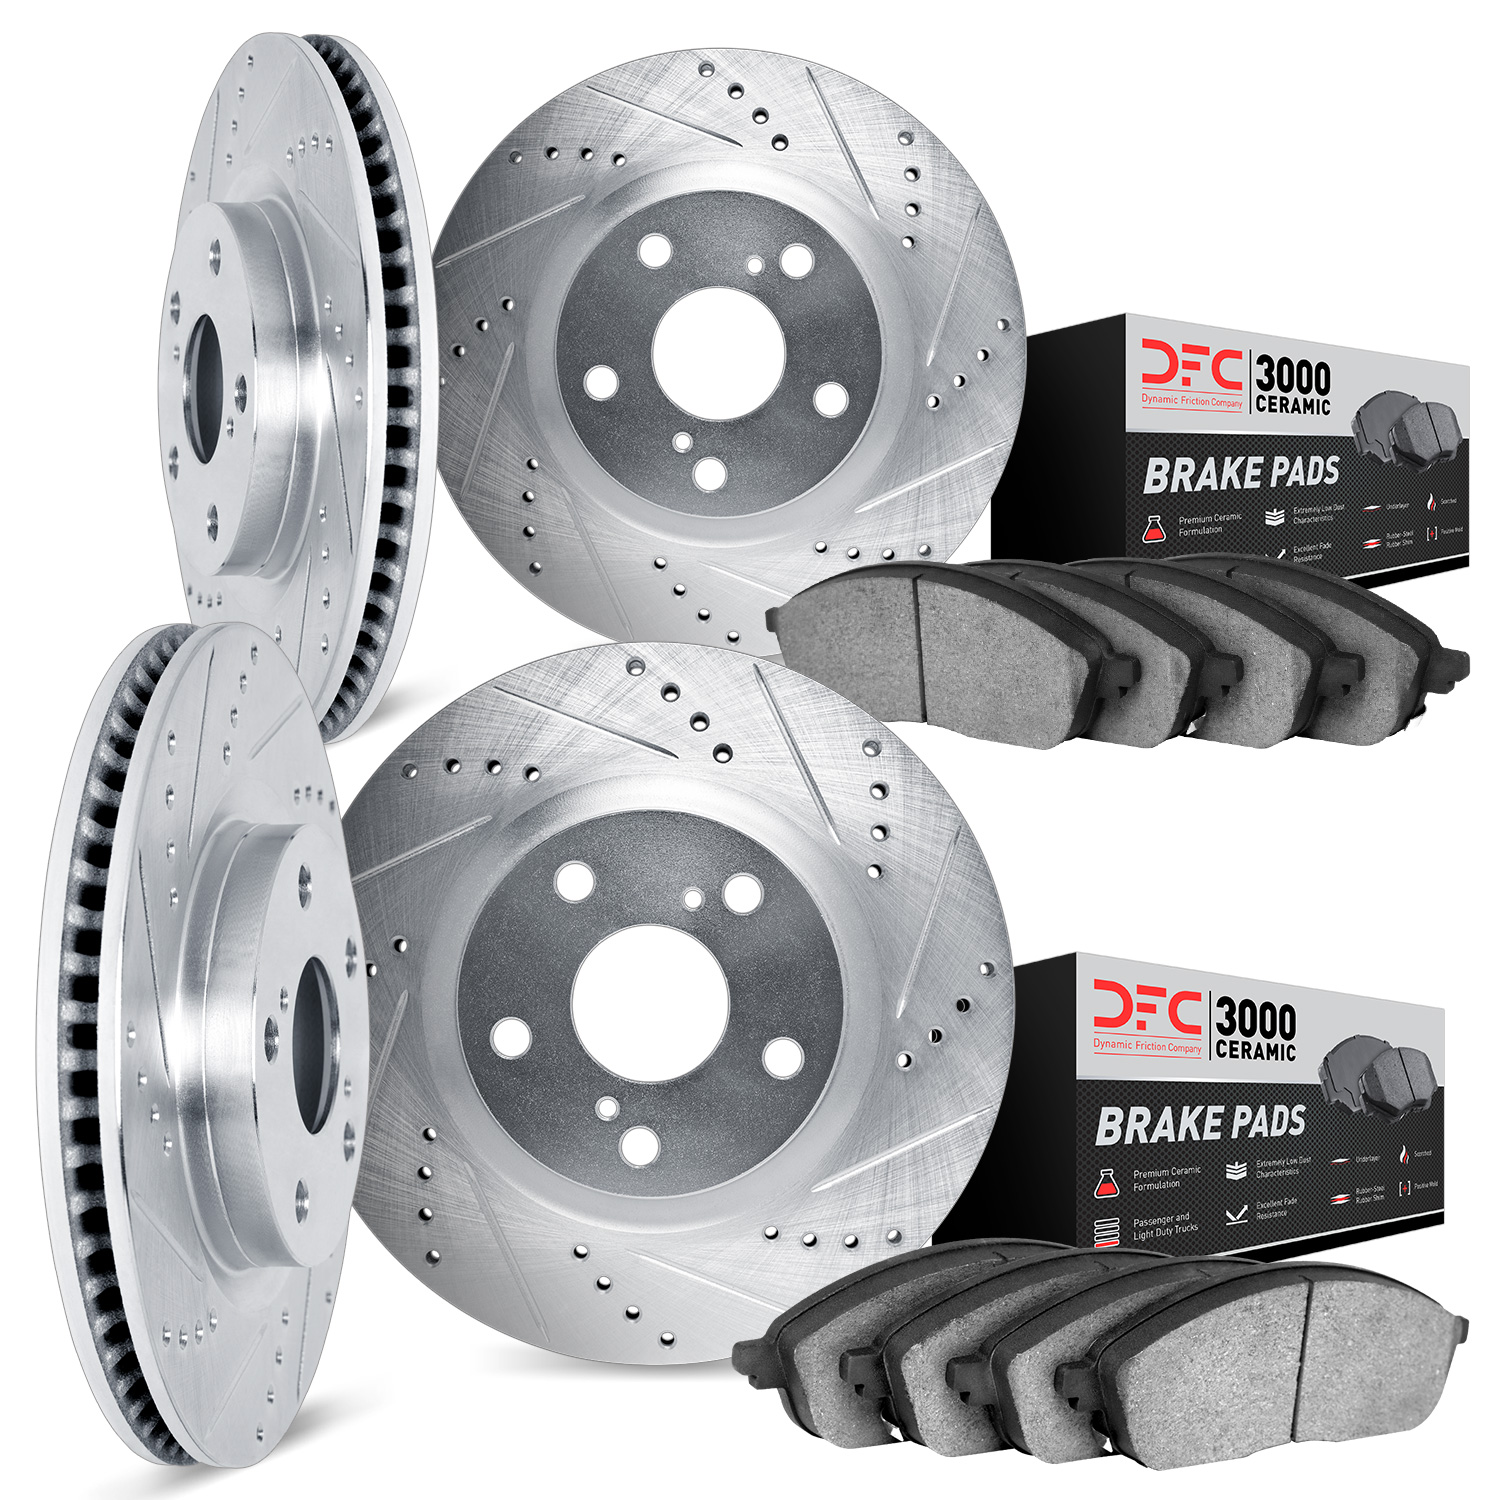 7304-80033 Drilled/Slotted Brake Rotor with 3000-Series Ceramic Brake Pads Kit [Silver], 2007-2015 Ford/Lincoln/Mercury/Mazda, P